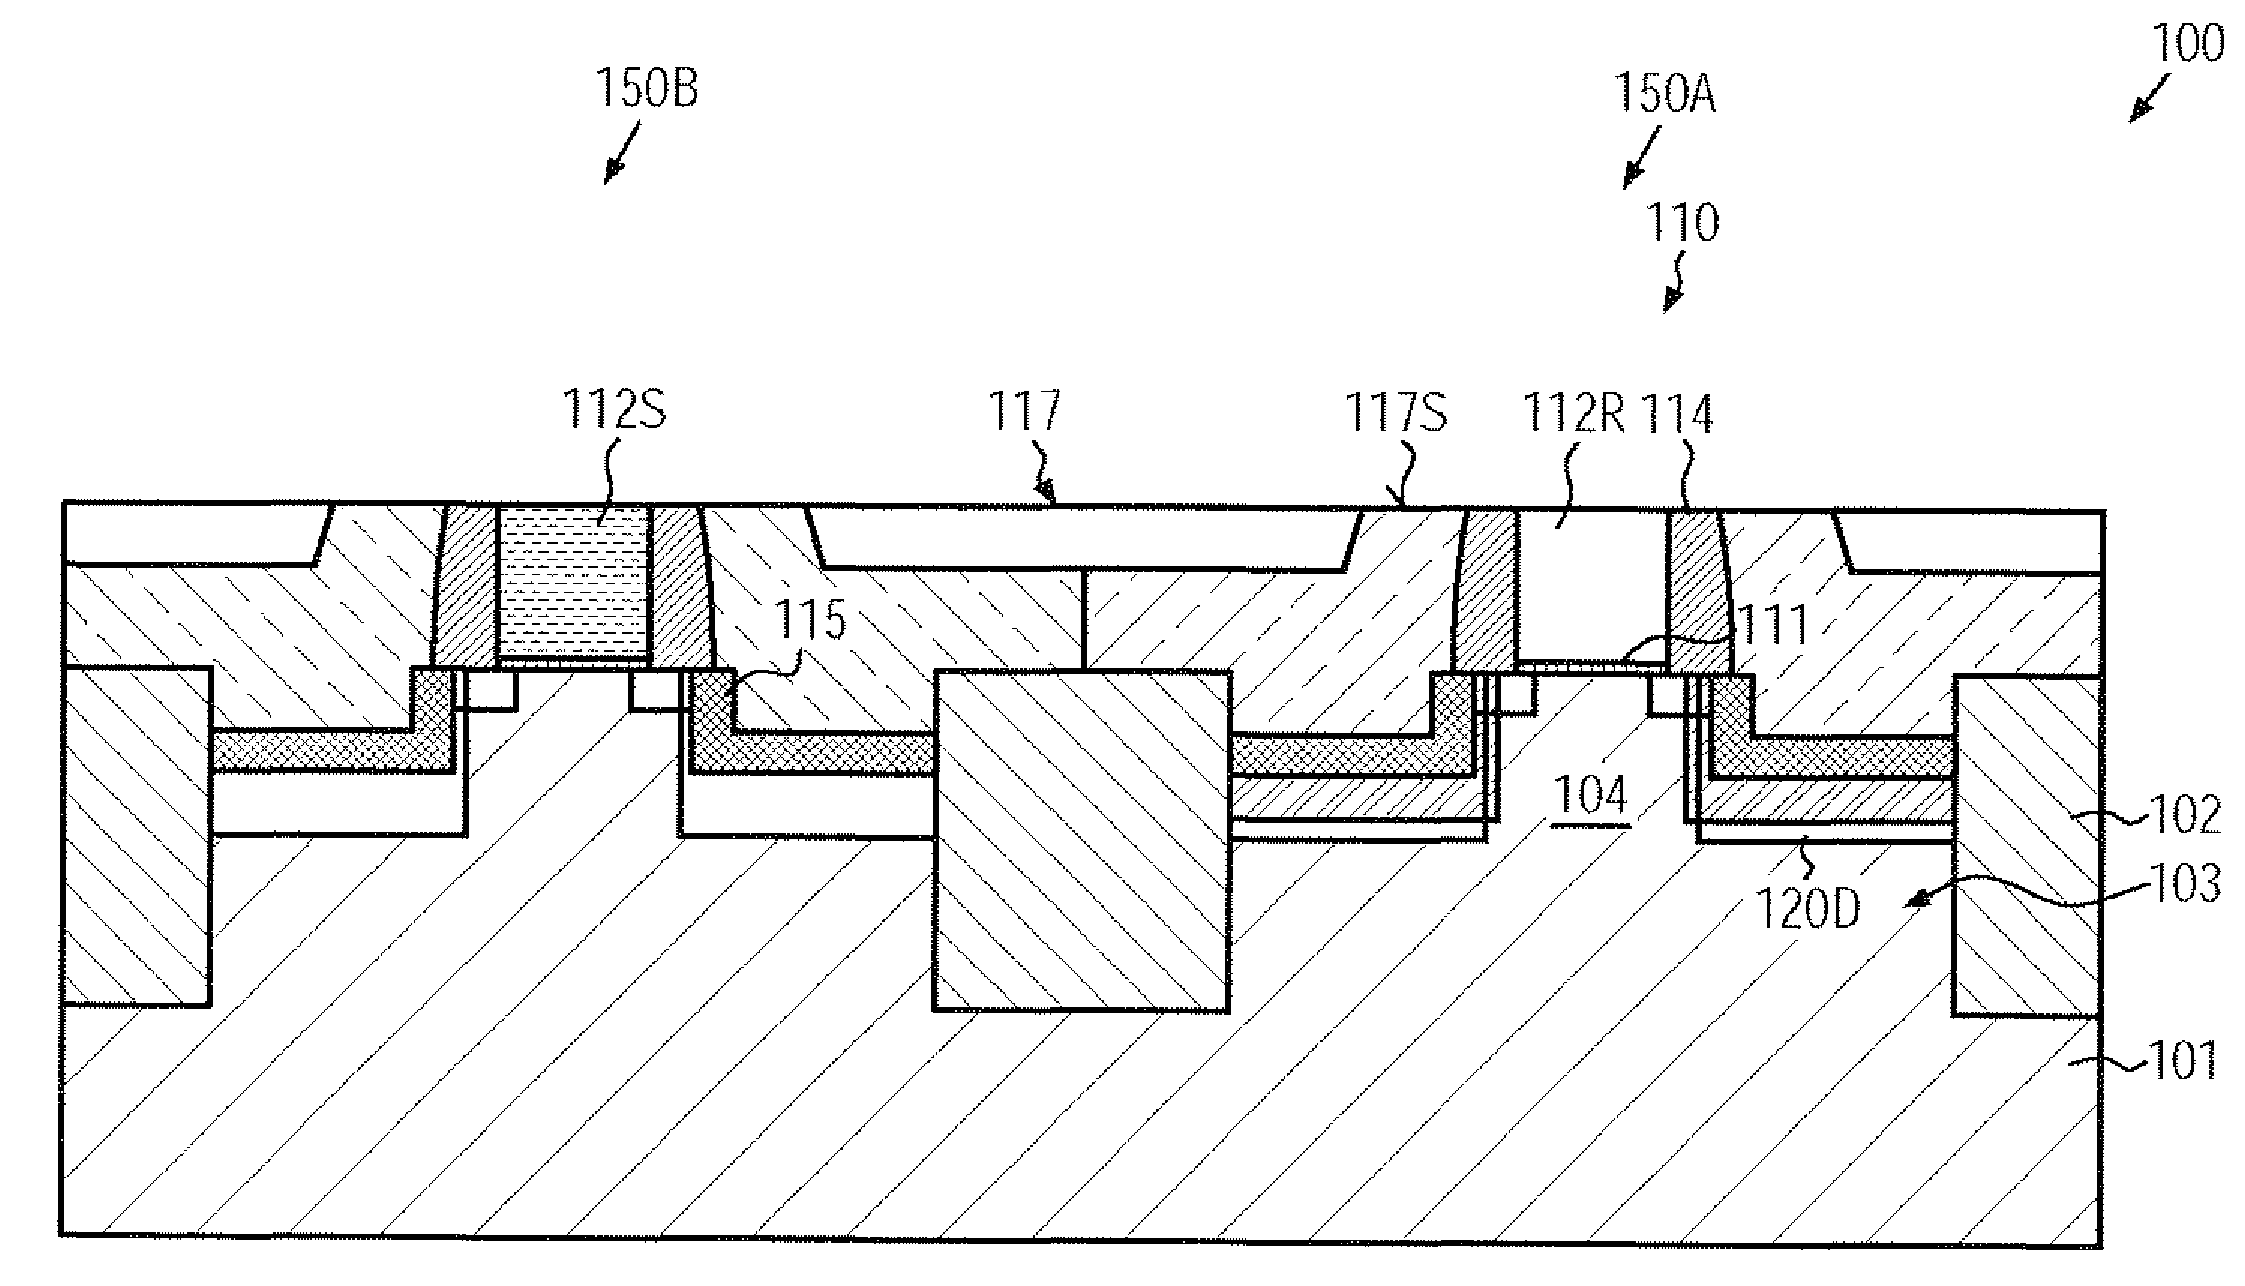 CMOS device comprising MOS transistors with recessed drain and source areas and a SI/GE material in the drain and source areas of the PMOS transistor